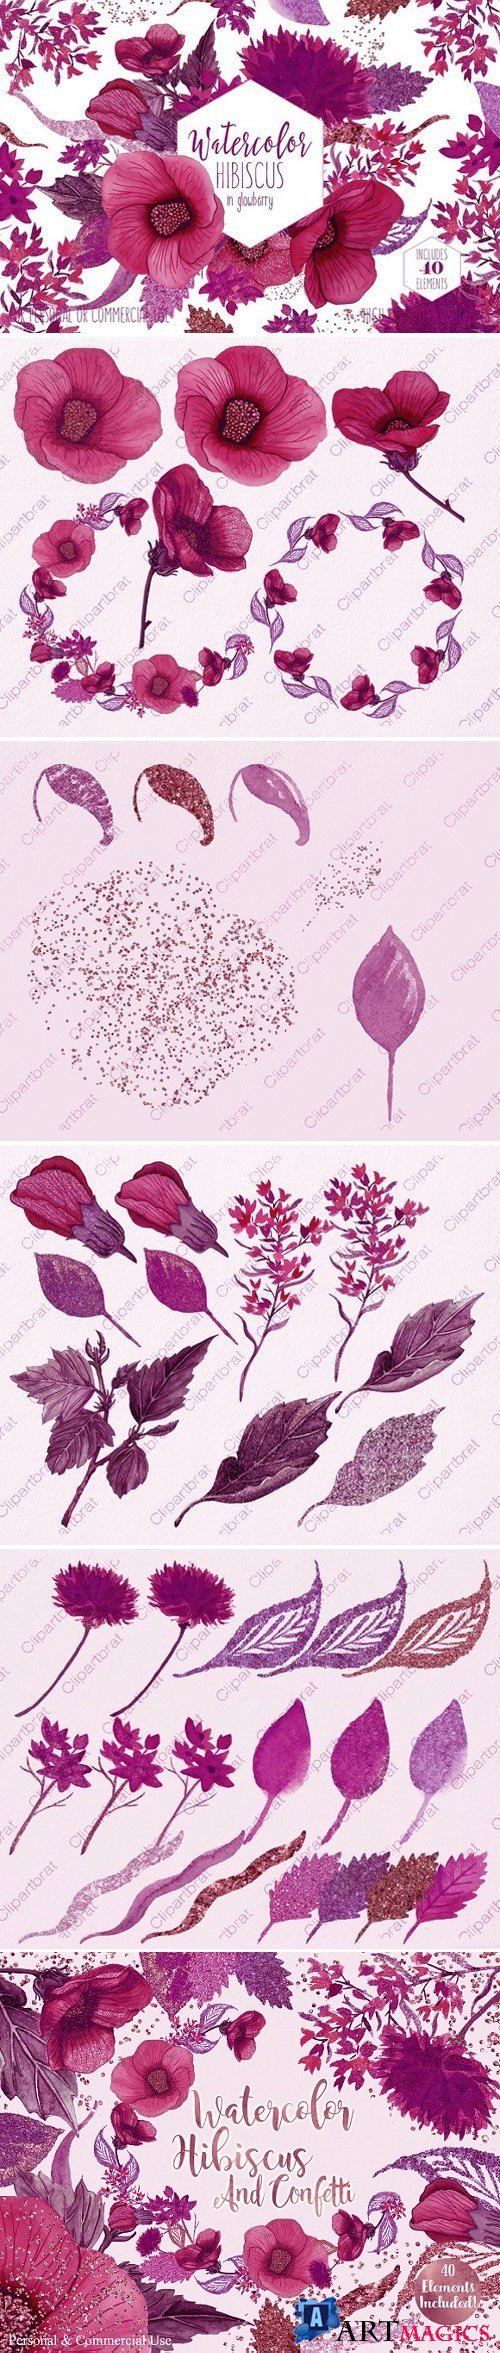 Wine Pink Tropical Floral Graphics 2186086